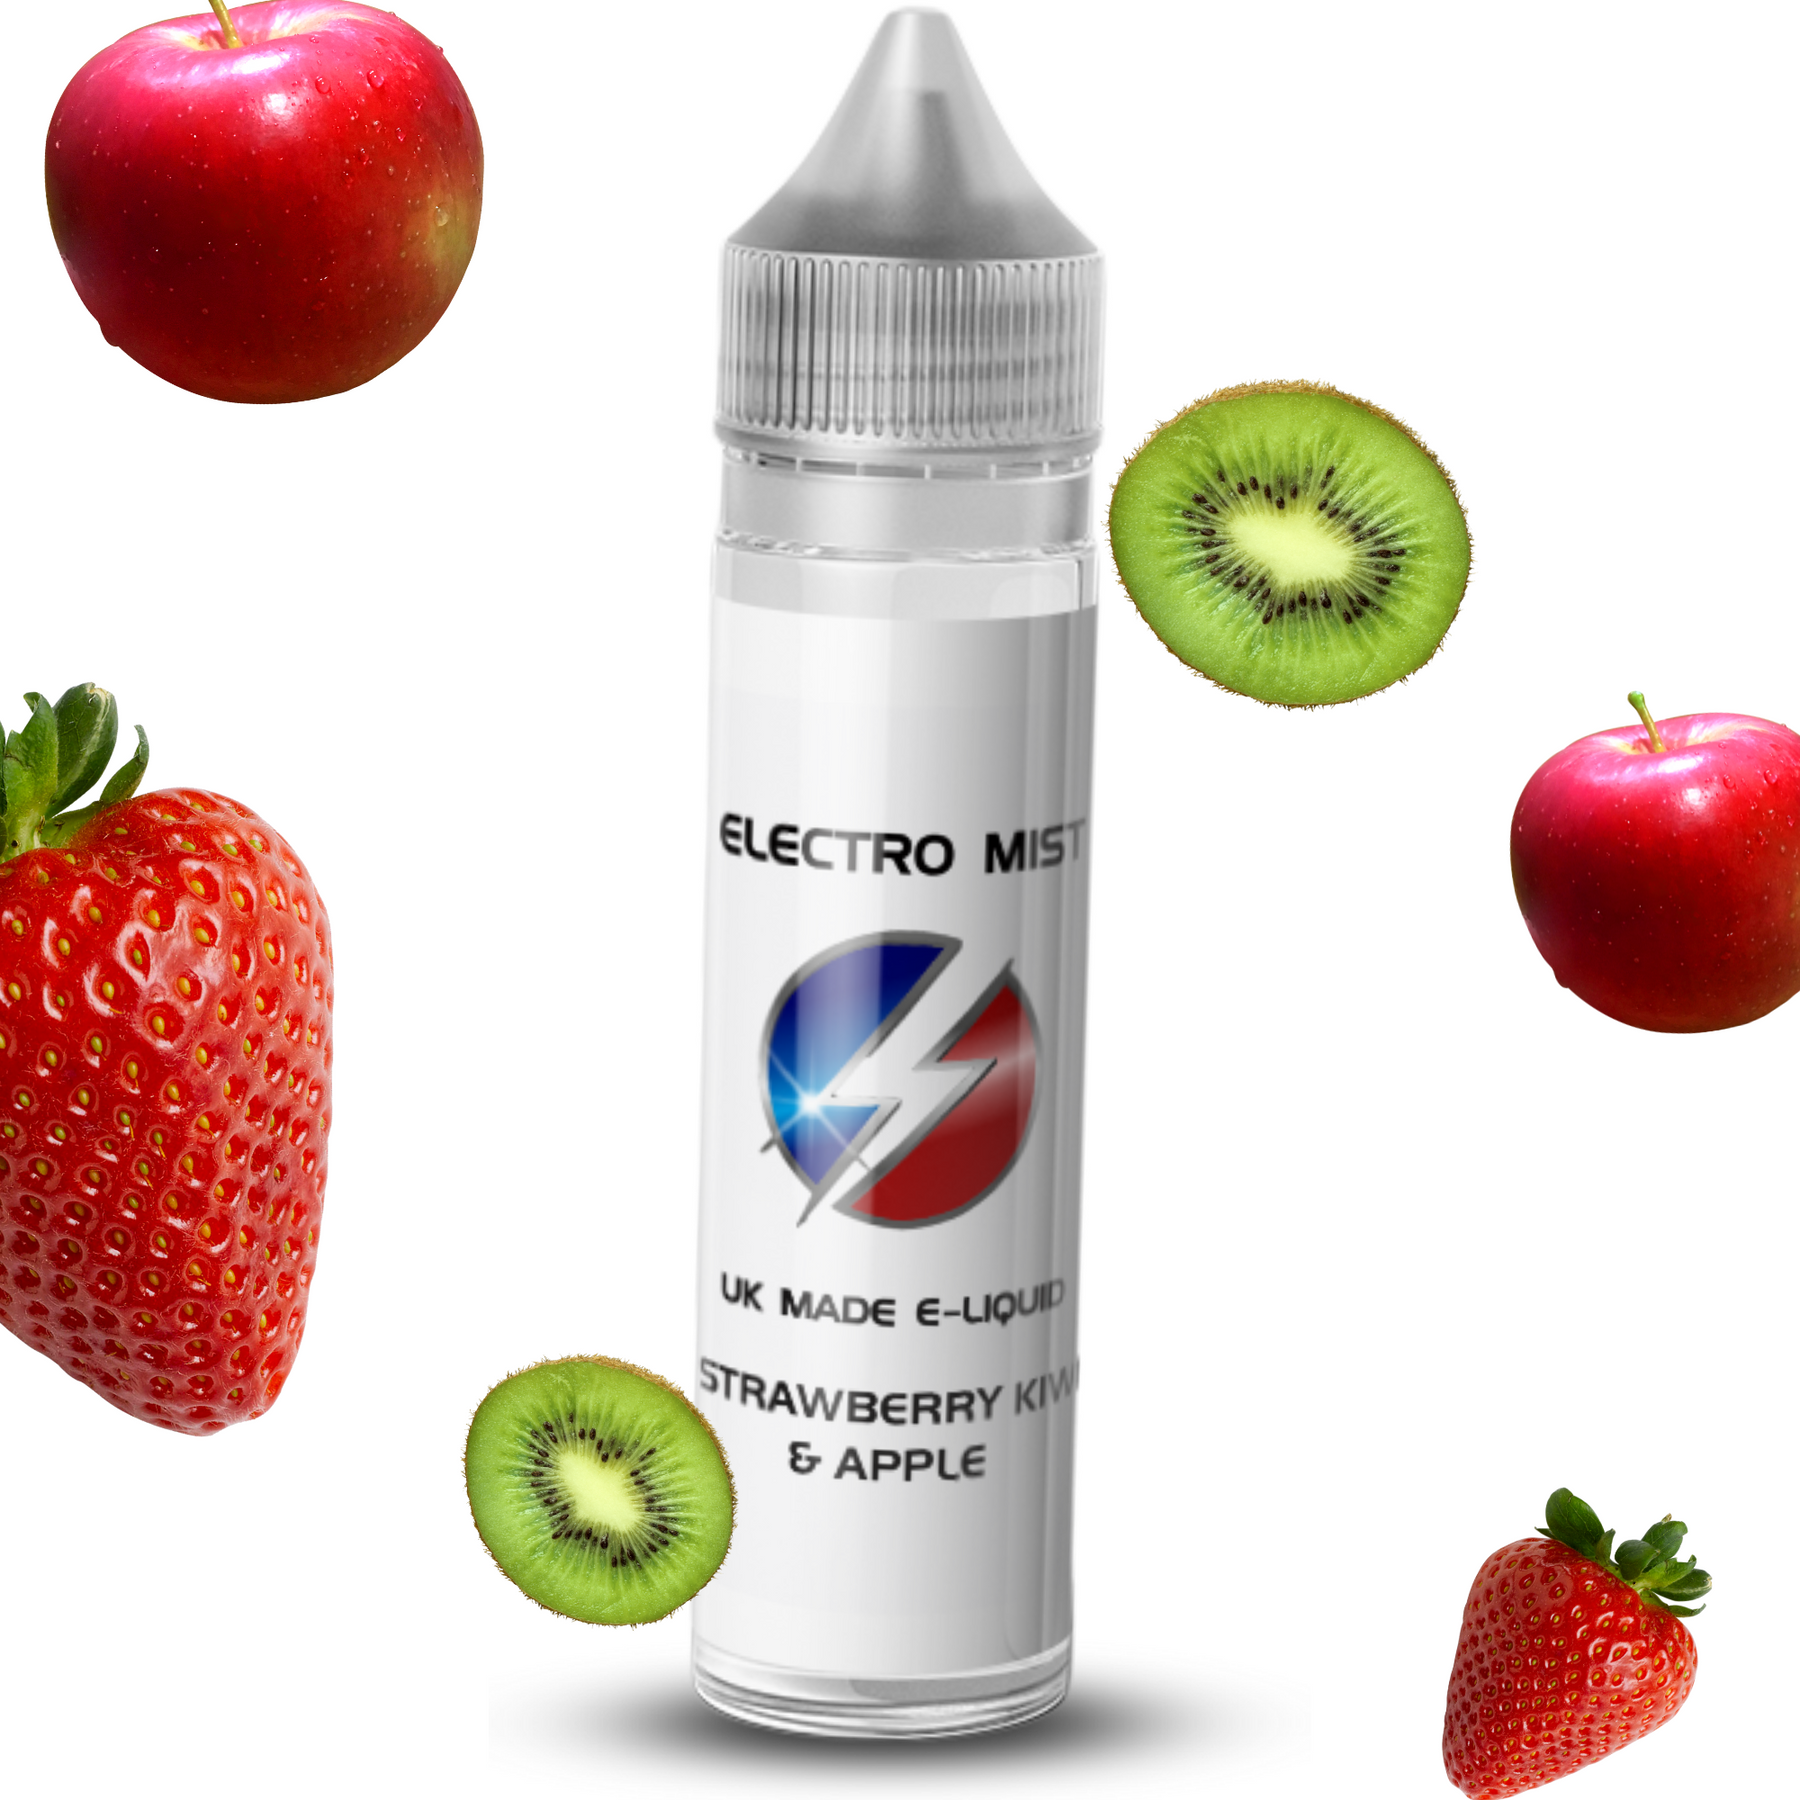 Electromist 50ml, the brand that you can trust for amazing flavour. Get your taste buds ready for a Strawberry Kiwi & Apple flavour sensation. 0mg Nicotine. ejuice, vape pen, eliquid, e cigarette, 50ml, vaping, PG, VG, 70/30, vape liquid, Flavour, Strawberry Kiwi & Apple, cloud.